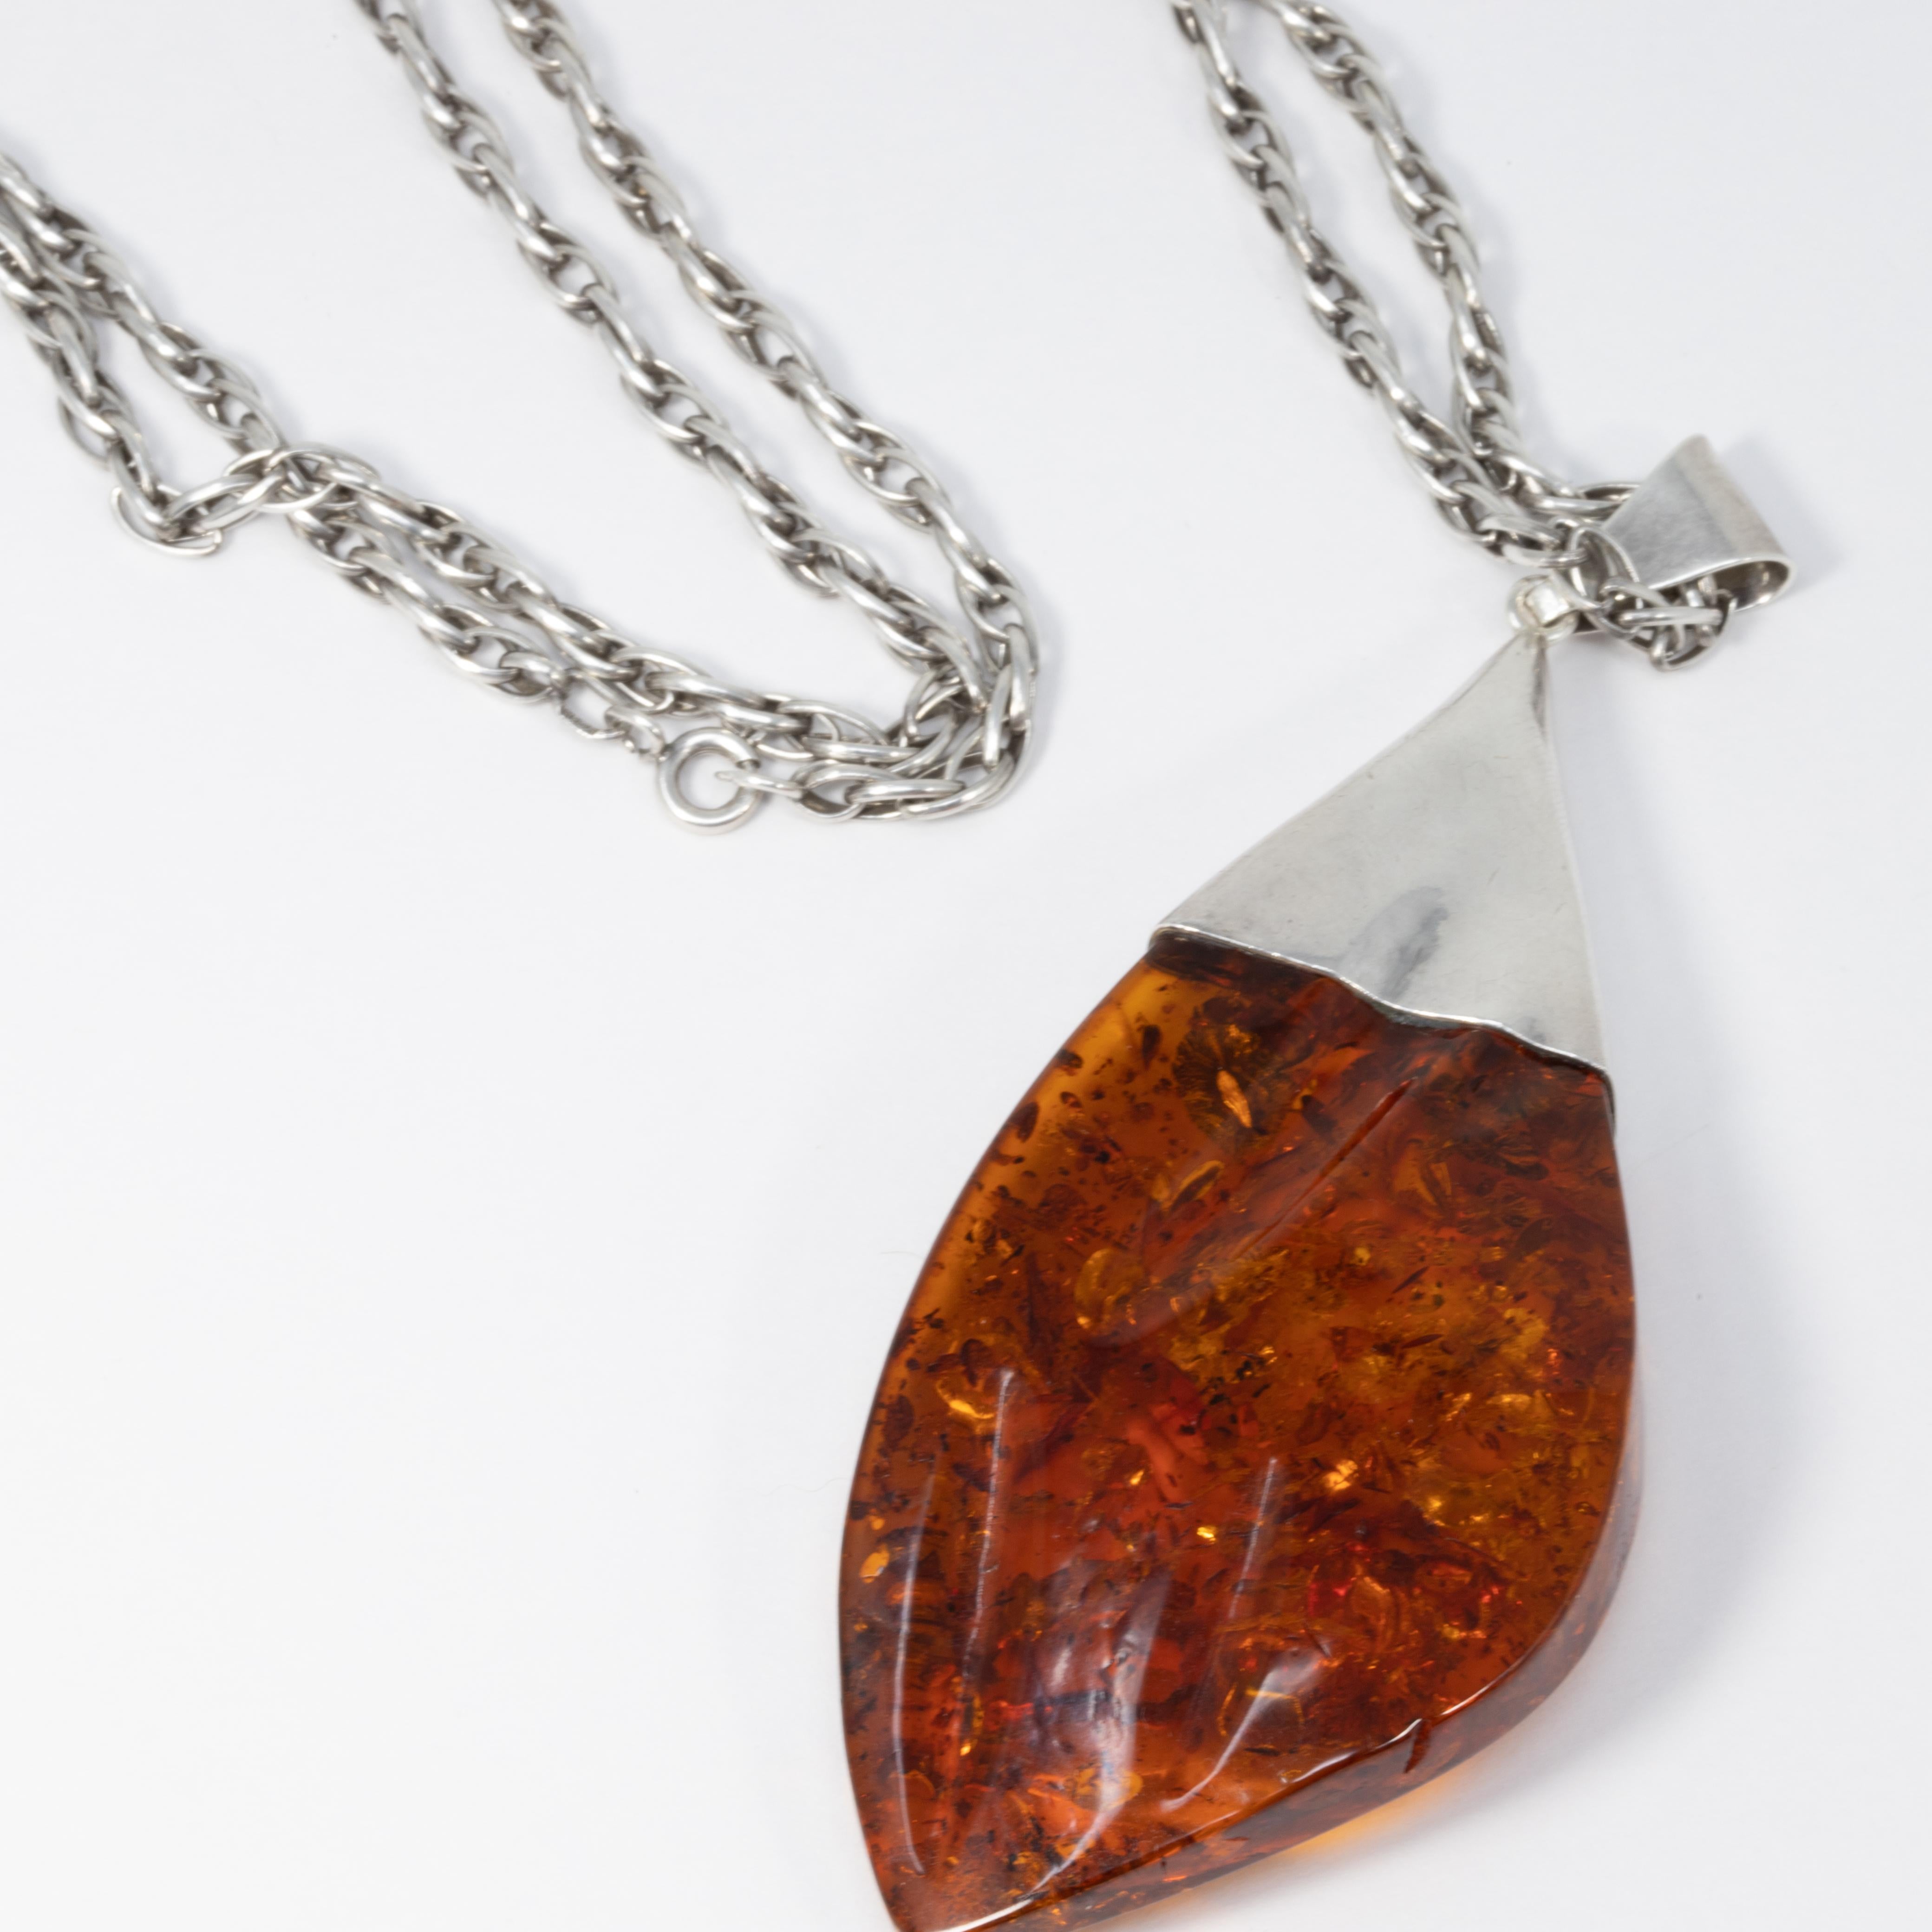 Russian Revival Vintage Russian Baltic Amber Pendant Necklace, Ornate Sterling Silver Necklace For Sale